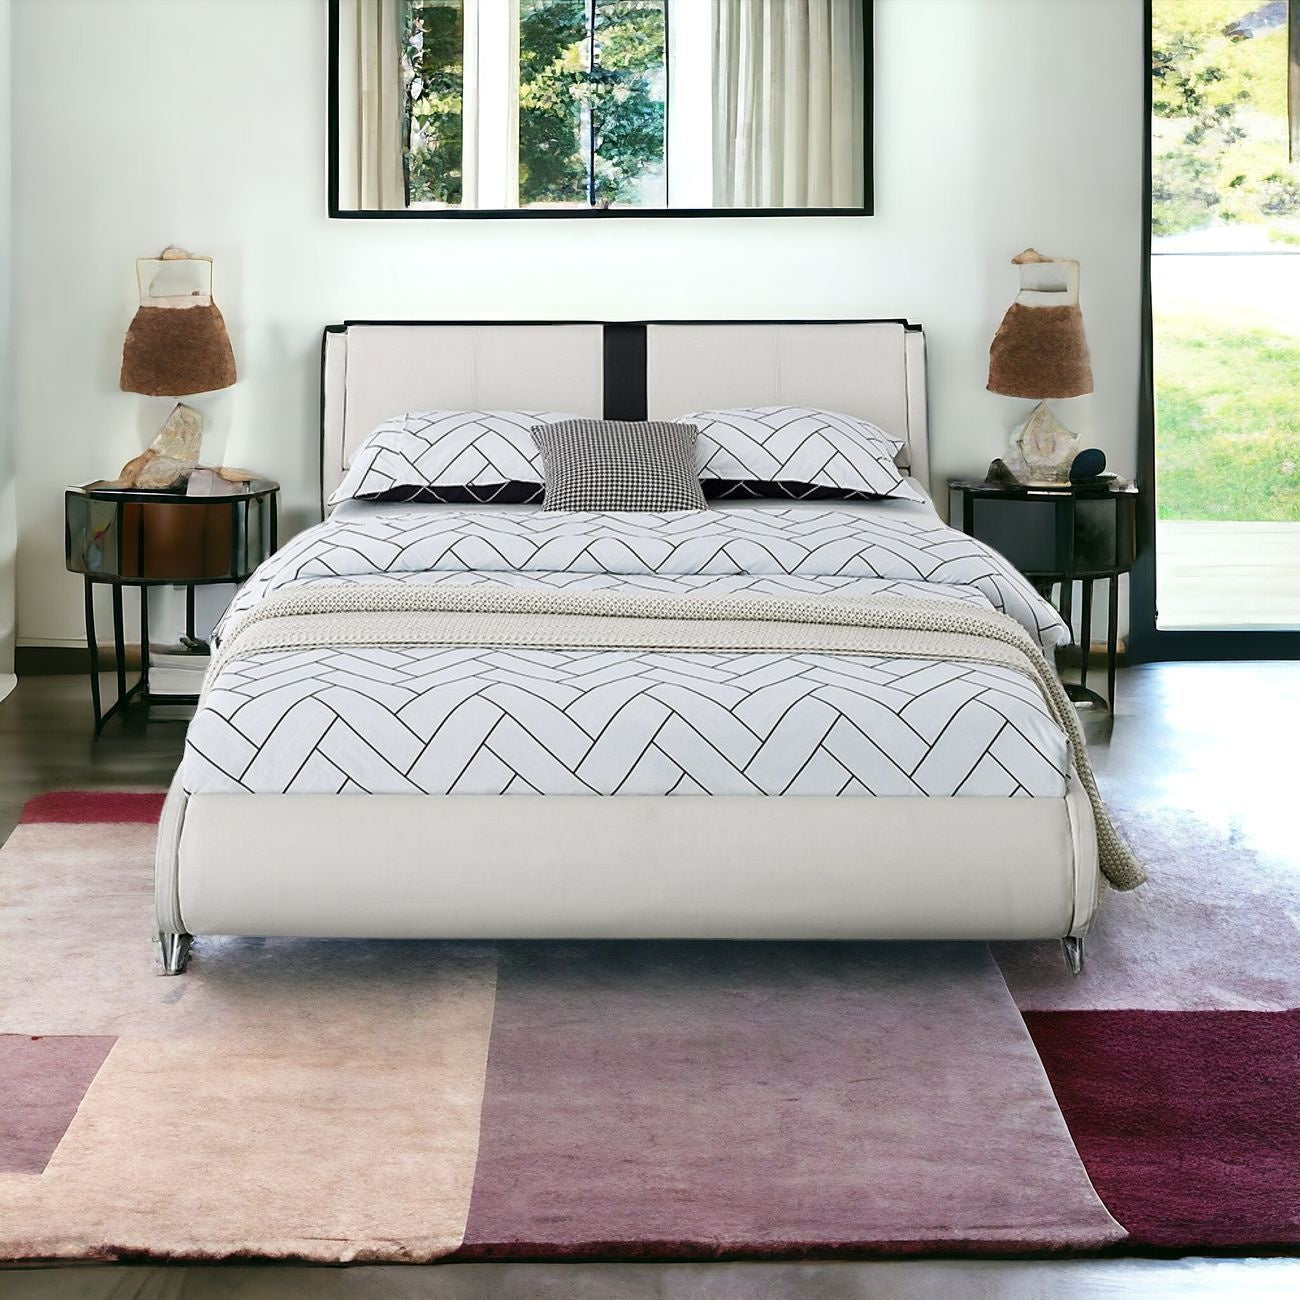 Solid Manufactured Wood Bed Upholstered With Headboard